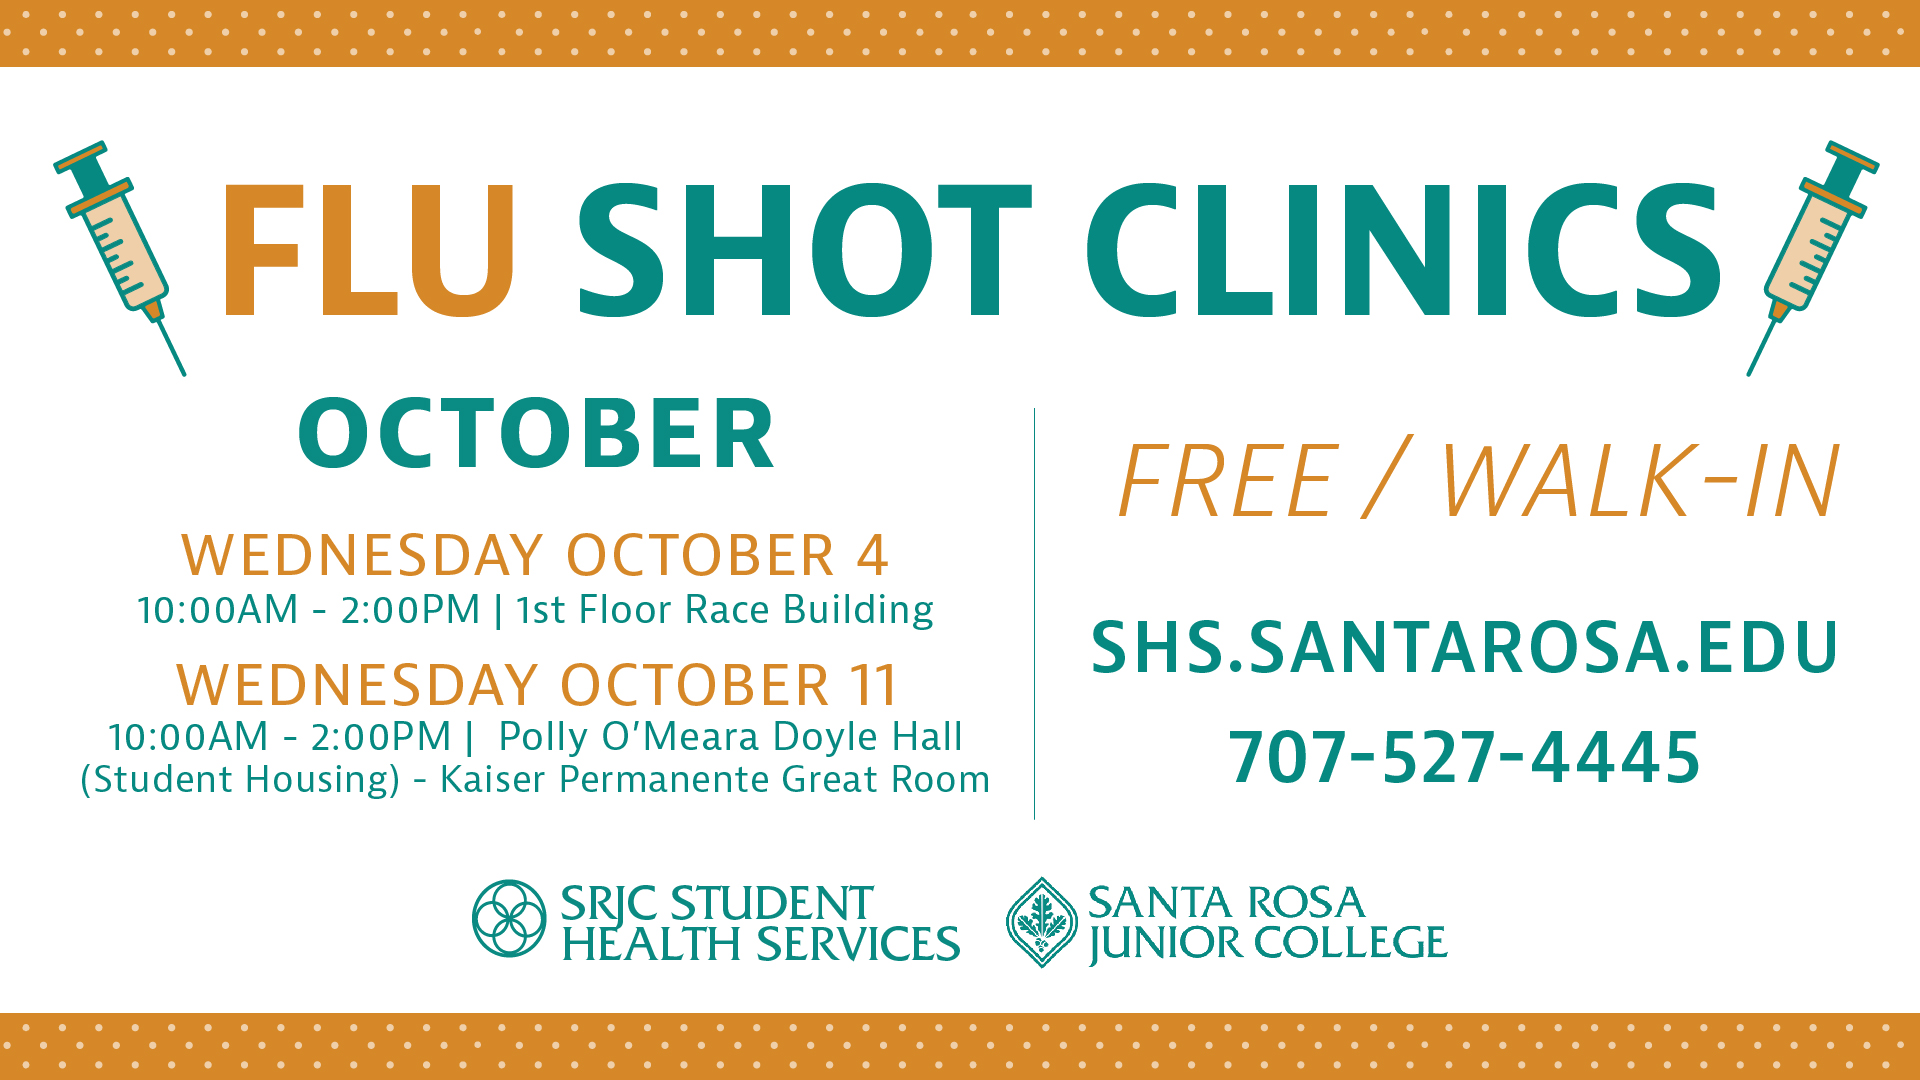 The image features a flyer advertising flu shot clinics. The main focus of the flyer is the text "FLU SHOT CLINICS," which is displayed prominently in green and orange lettering. Below the main title, the text "Flu shot clinics" provides additional information about the location of the clinics.  On the top left and top right corners, there are icons representing a syringe on a white background. These icons symbolize the medical nature of the clinics.  Towards the right side of the image, there is the text "FREE / WALK-IN.  In the lower section of the image, various dates, times, and locations are listed: Wednesday September 27 10:00AM - 2:00PM | 1st Floor Race Building Wednesday october 4 10:00AM - 2:00PM | 1st Floor Race Building Wednesday october 11 10:00AM - 2:00PM | Polly O’Meara Doyle Hall (Student Housing) - Kaiser Permanente Great Room  Towards the bottom left of the image, the website "SHS.SANTAROSA.EDU" is displayed, along with the contact number "707-527-4445". The Student Health Services logo is at the bottom, next to the SRJC Logo